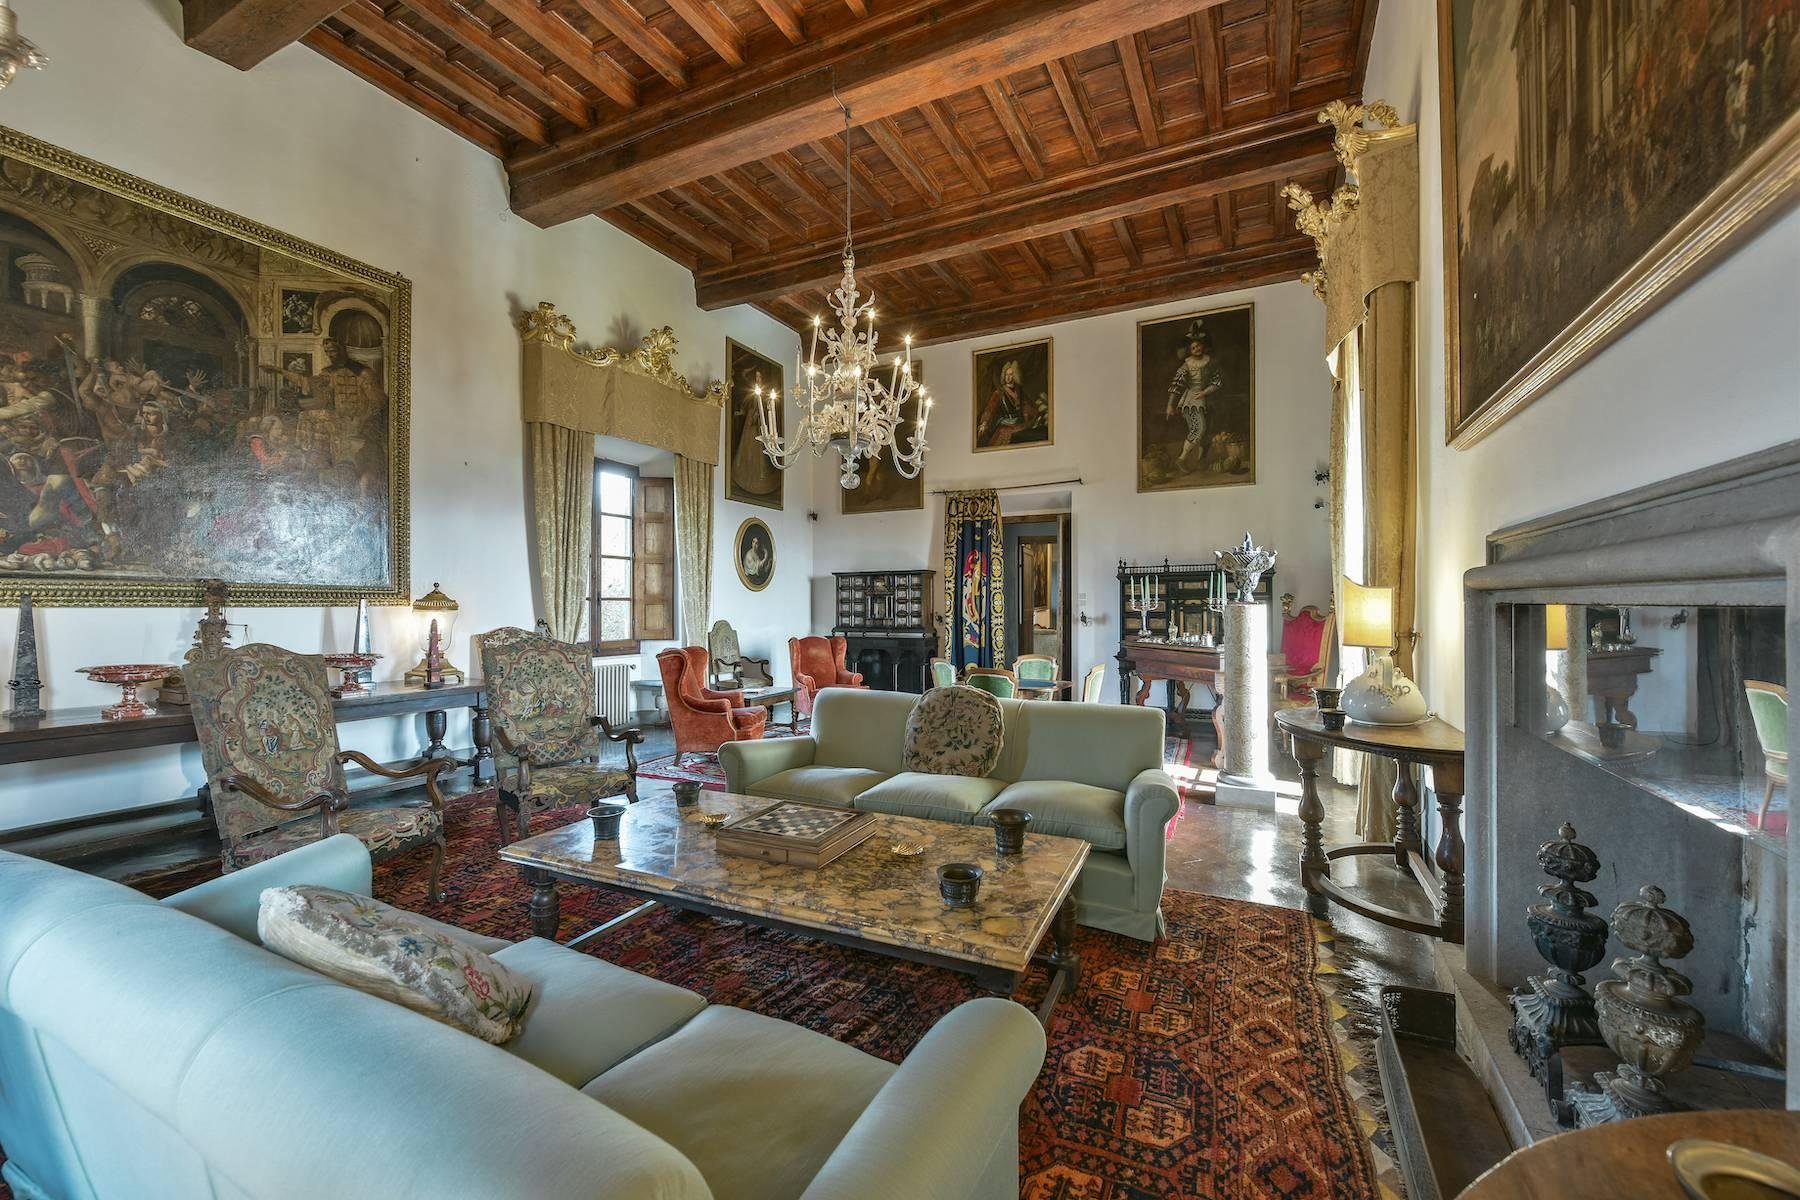 Francis York  Tuscan Villa Owned by Italian Aristocracy Available to Book as a Luxury Villa Rental 12.jpg